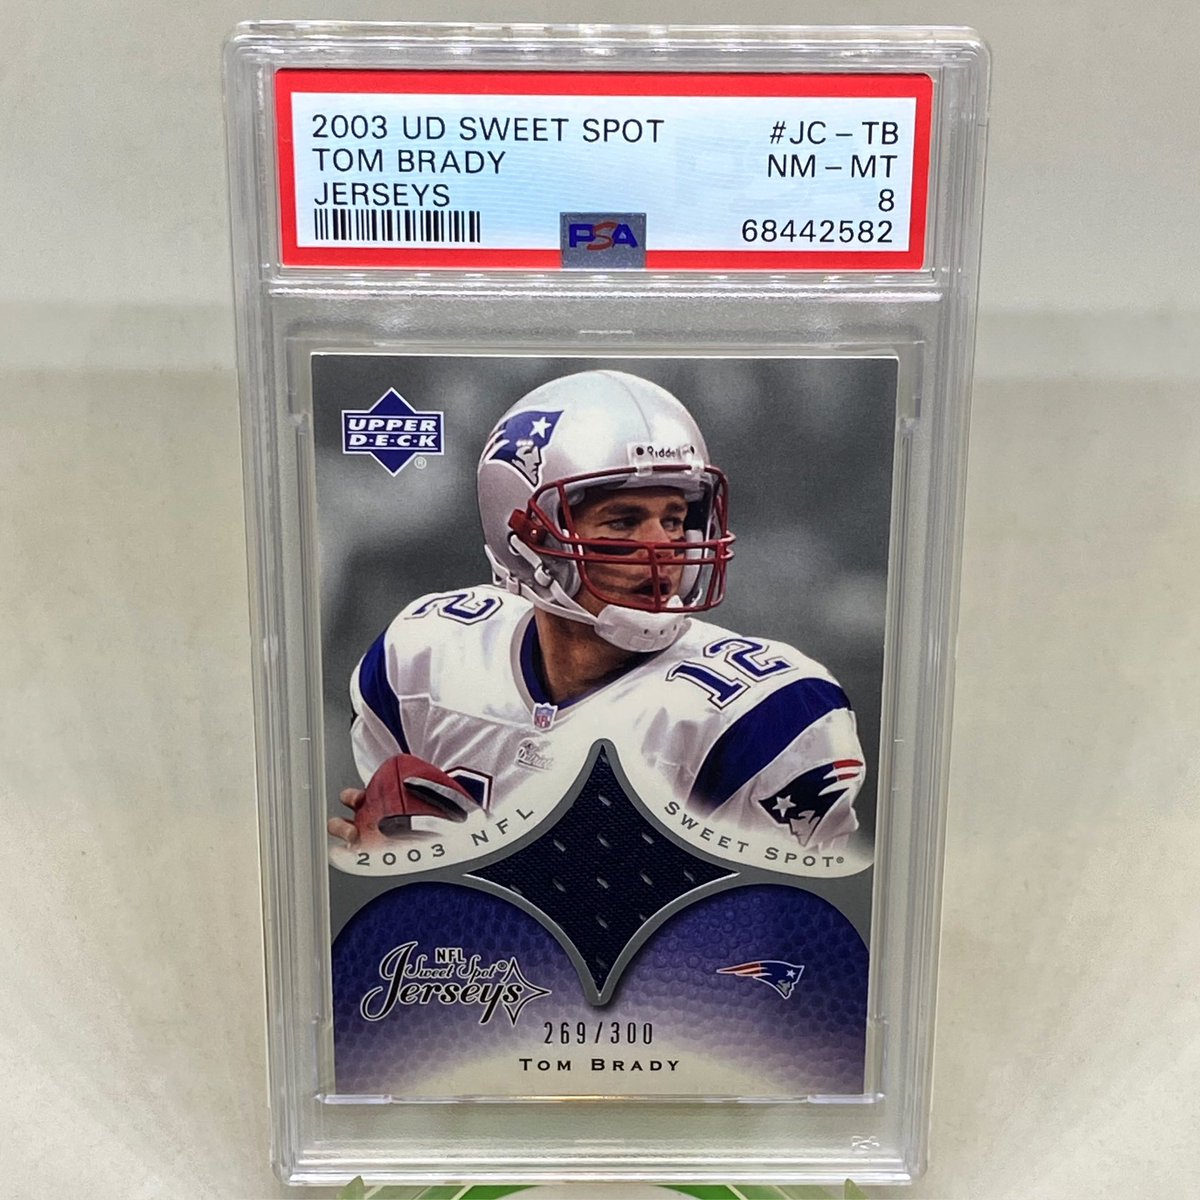 🏈 TOM BRADY 🏈
2003 #upperdeck #sweetspot #authentic #gameworn #jersey #tombrady 269/300 #patriots #psacard #graded #slabbed #collect #thehobby #whodoyoucollect #tradingcardsandthings #newengland #newenglandpatriots #nfl #football #brady #tb12 #goat #tradingcards #tctsportscards